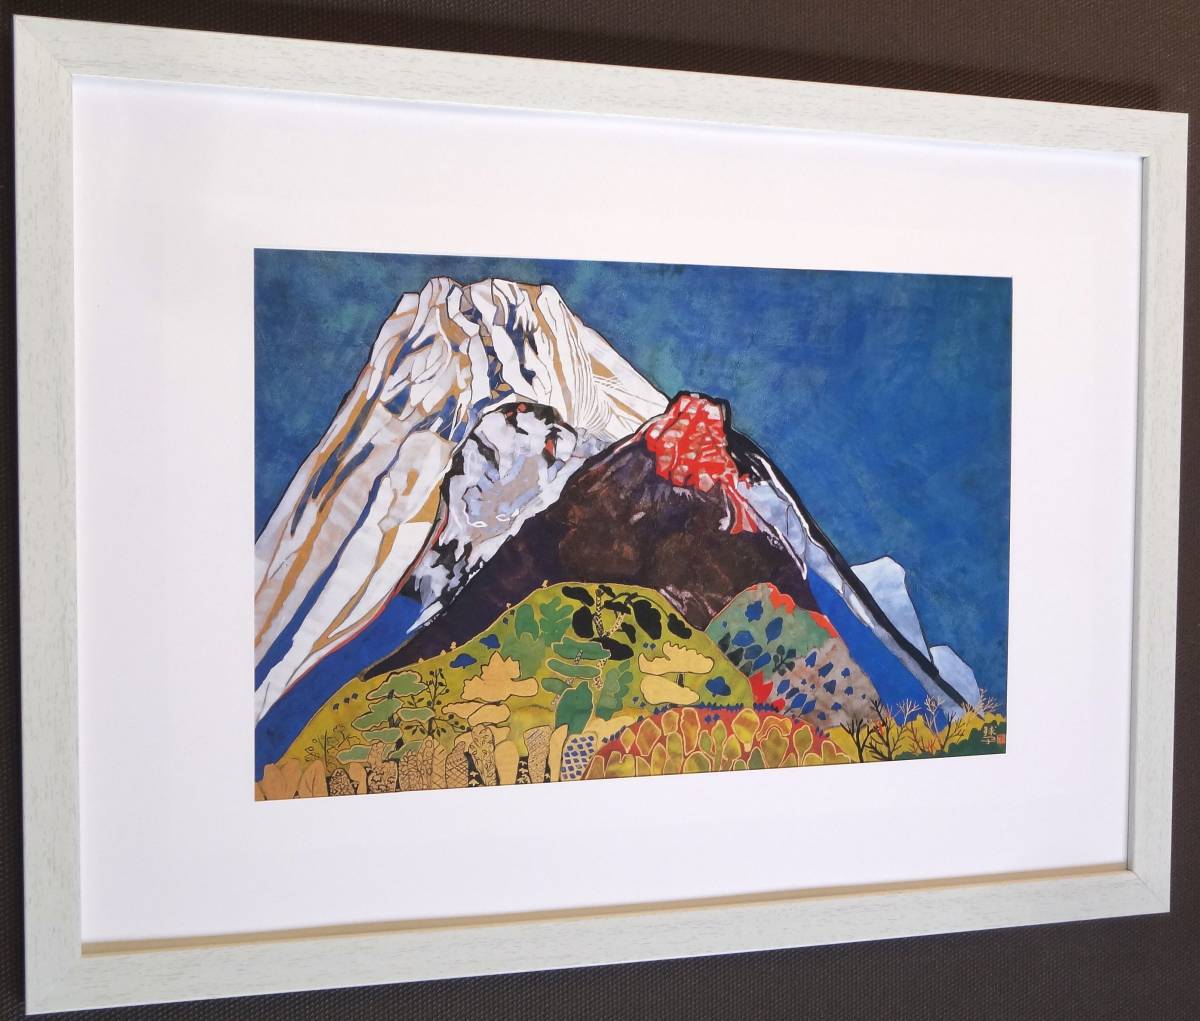 Large-format★Kataoka Tamako [Auspicious Fuji (at Gotemba)] New A3 frame from a precious self-selected collection of paintings, Painting, Japanese painting, Landscape, Wind and moon